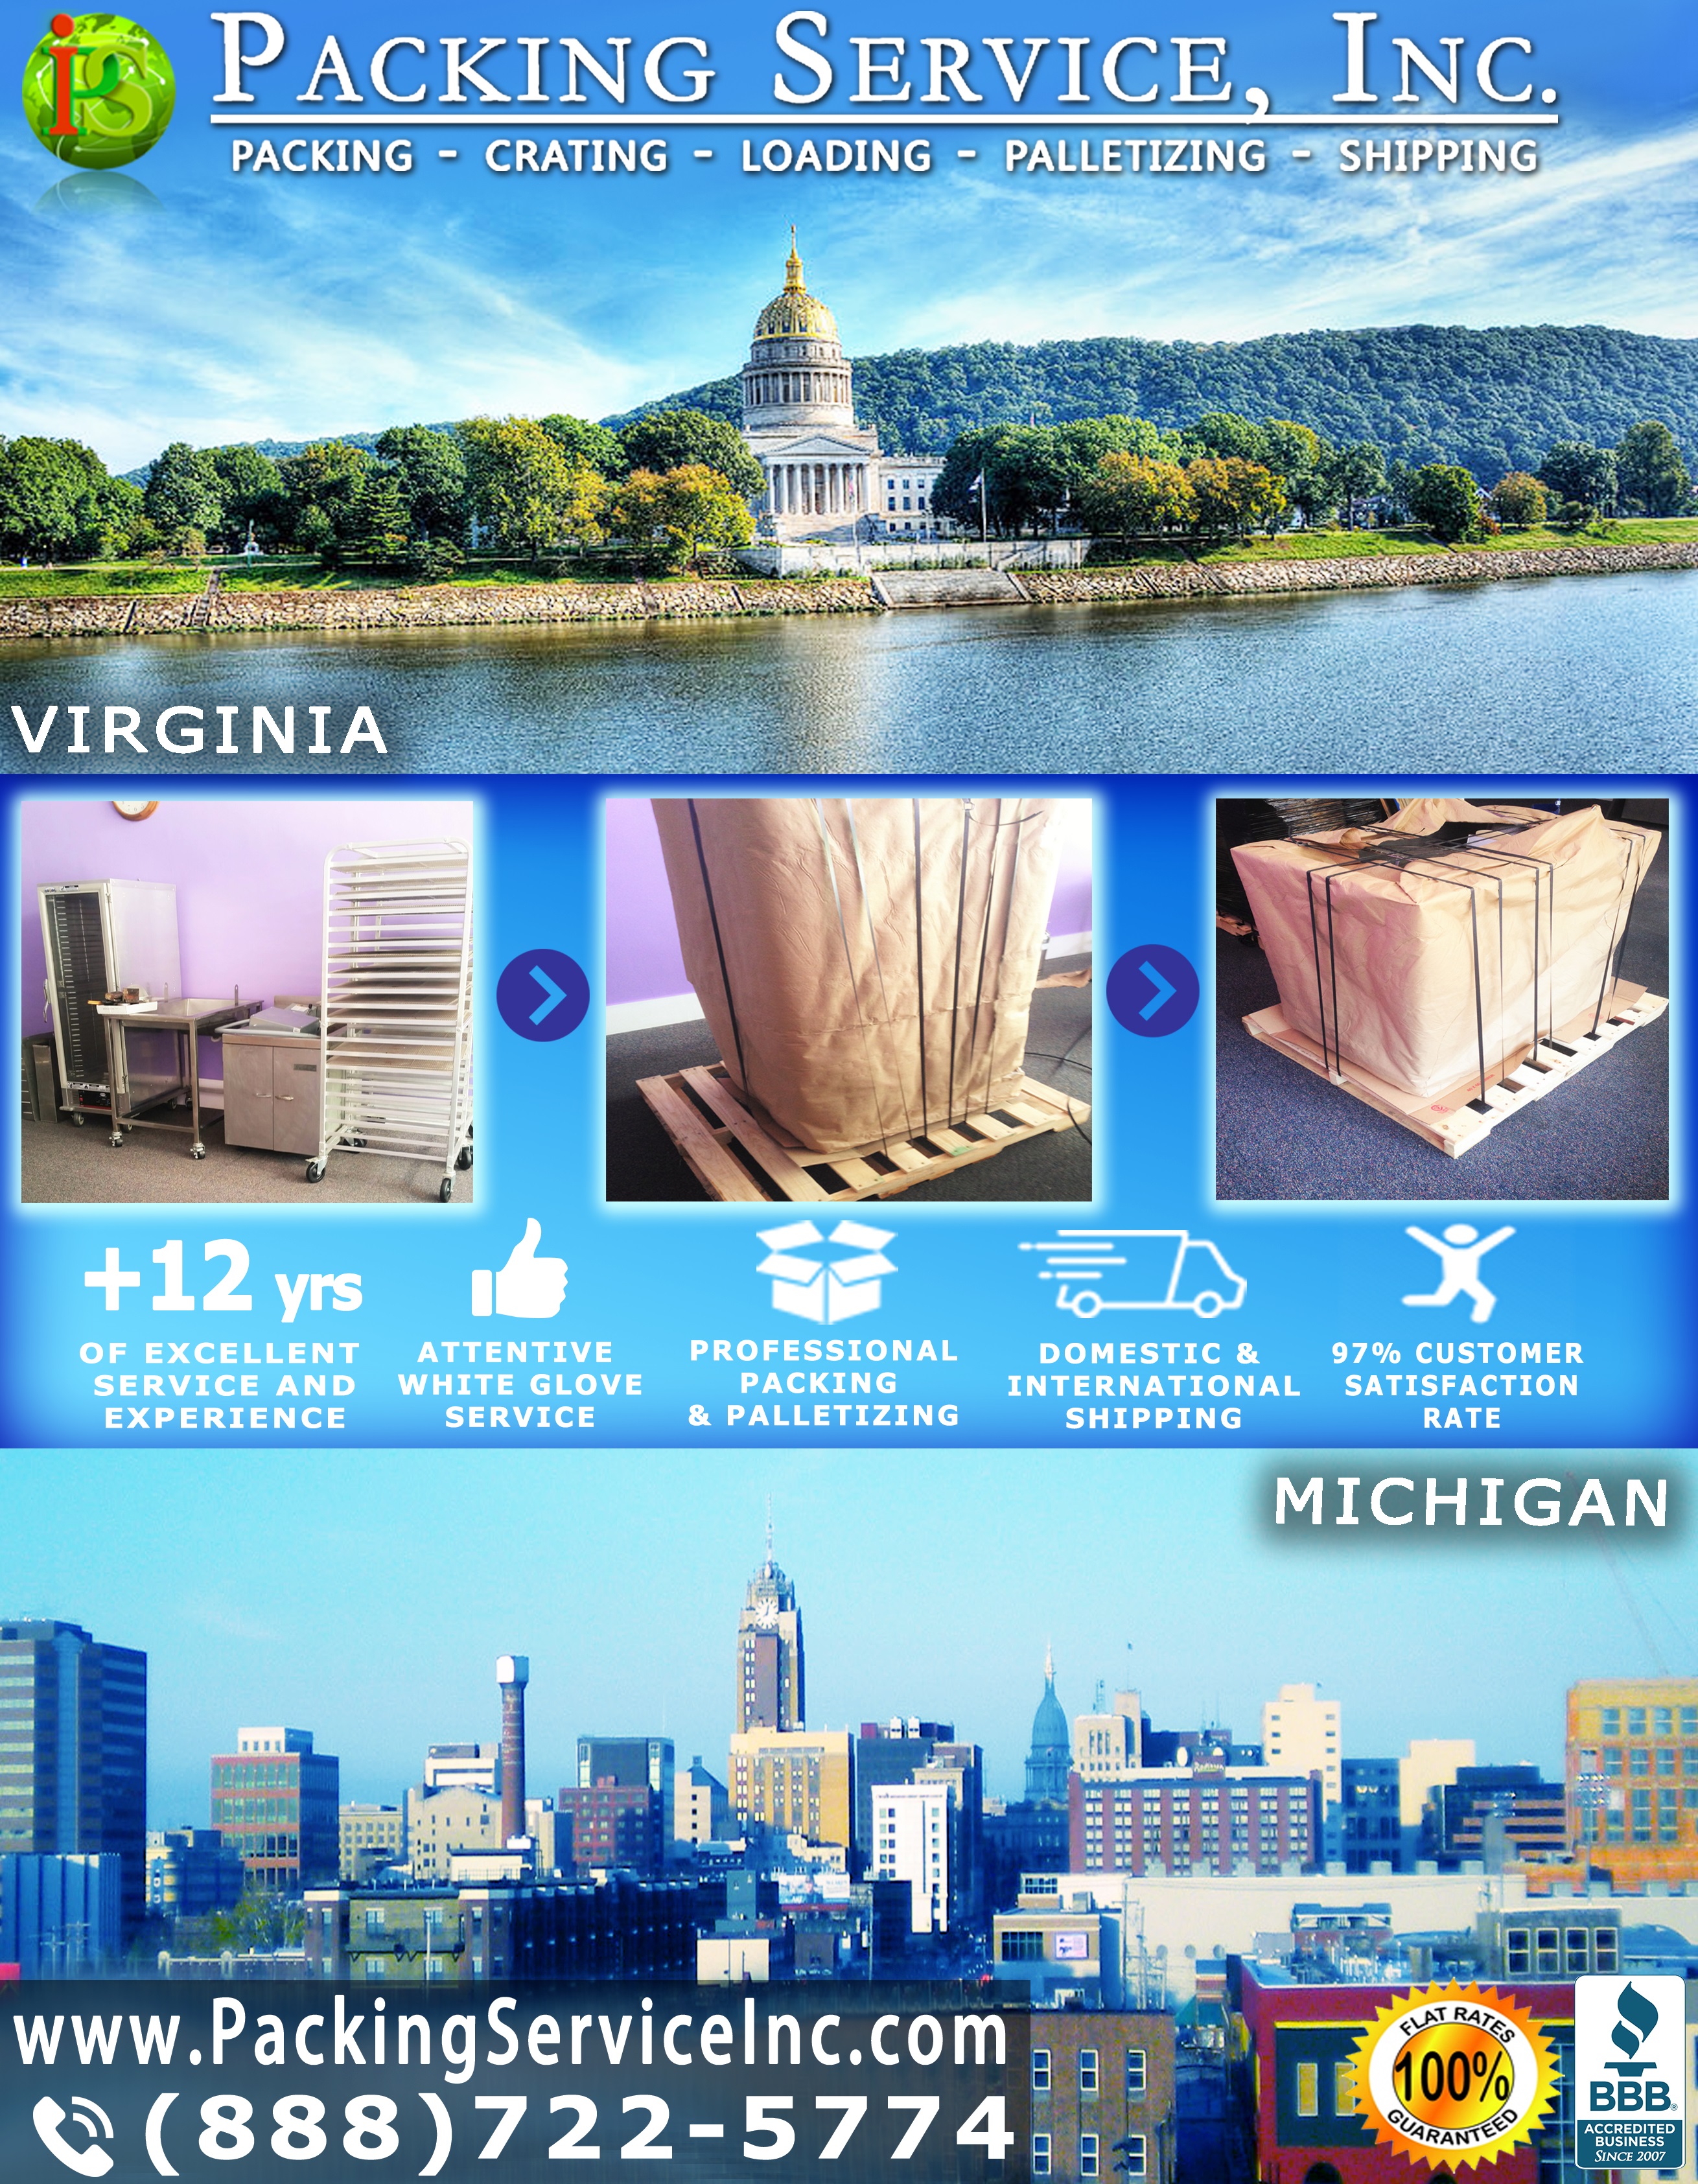 wrapping-restaurant-equipment-palletizing-and-shipping-from-virginia-to-michigan-with-packing-service-inc-447